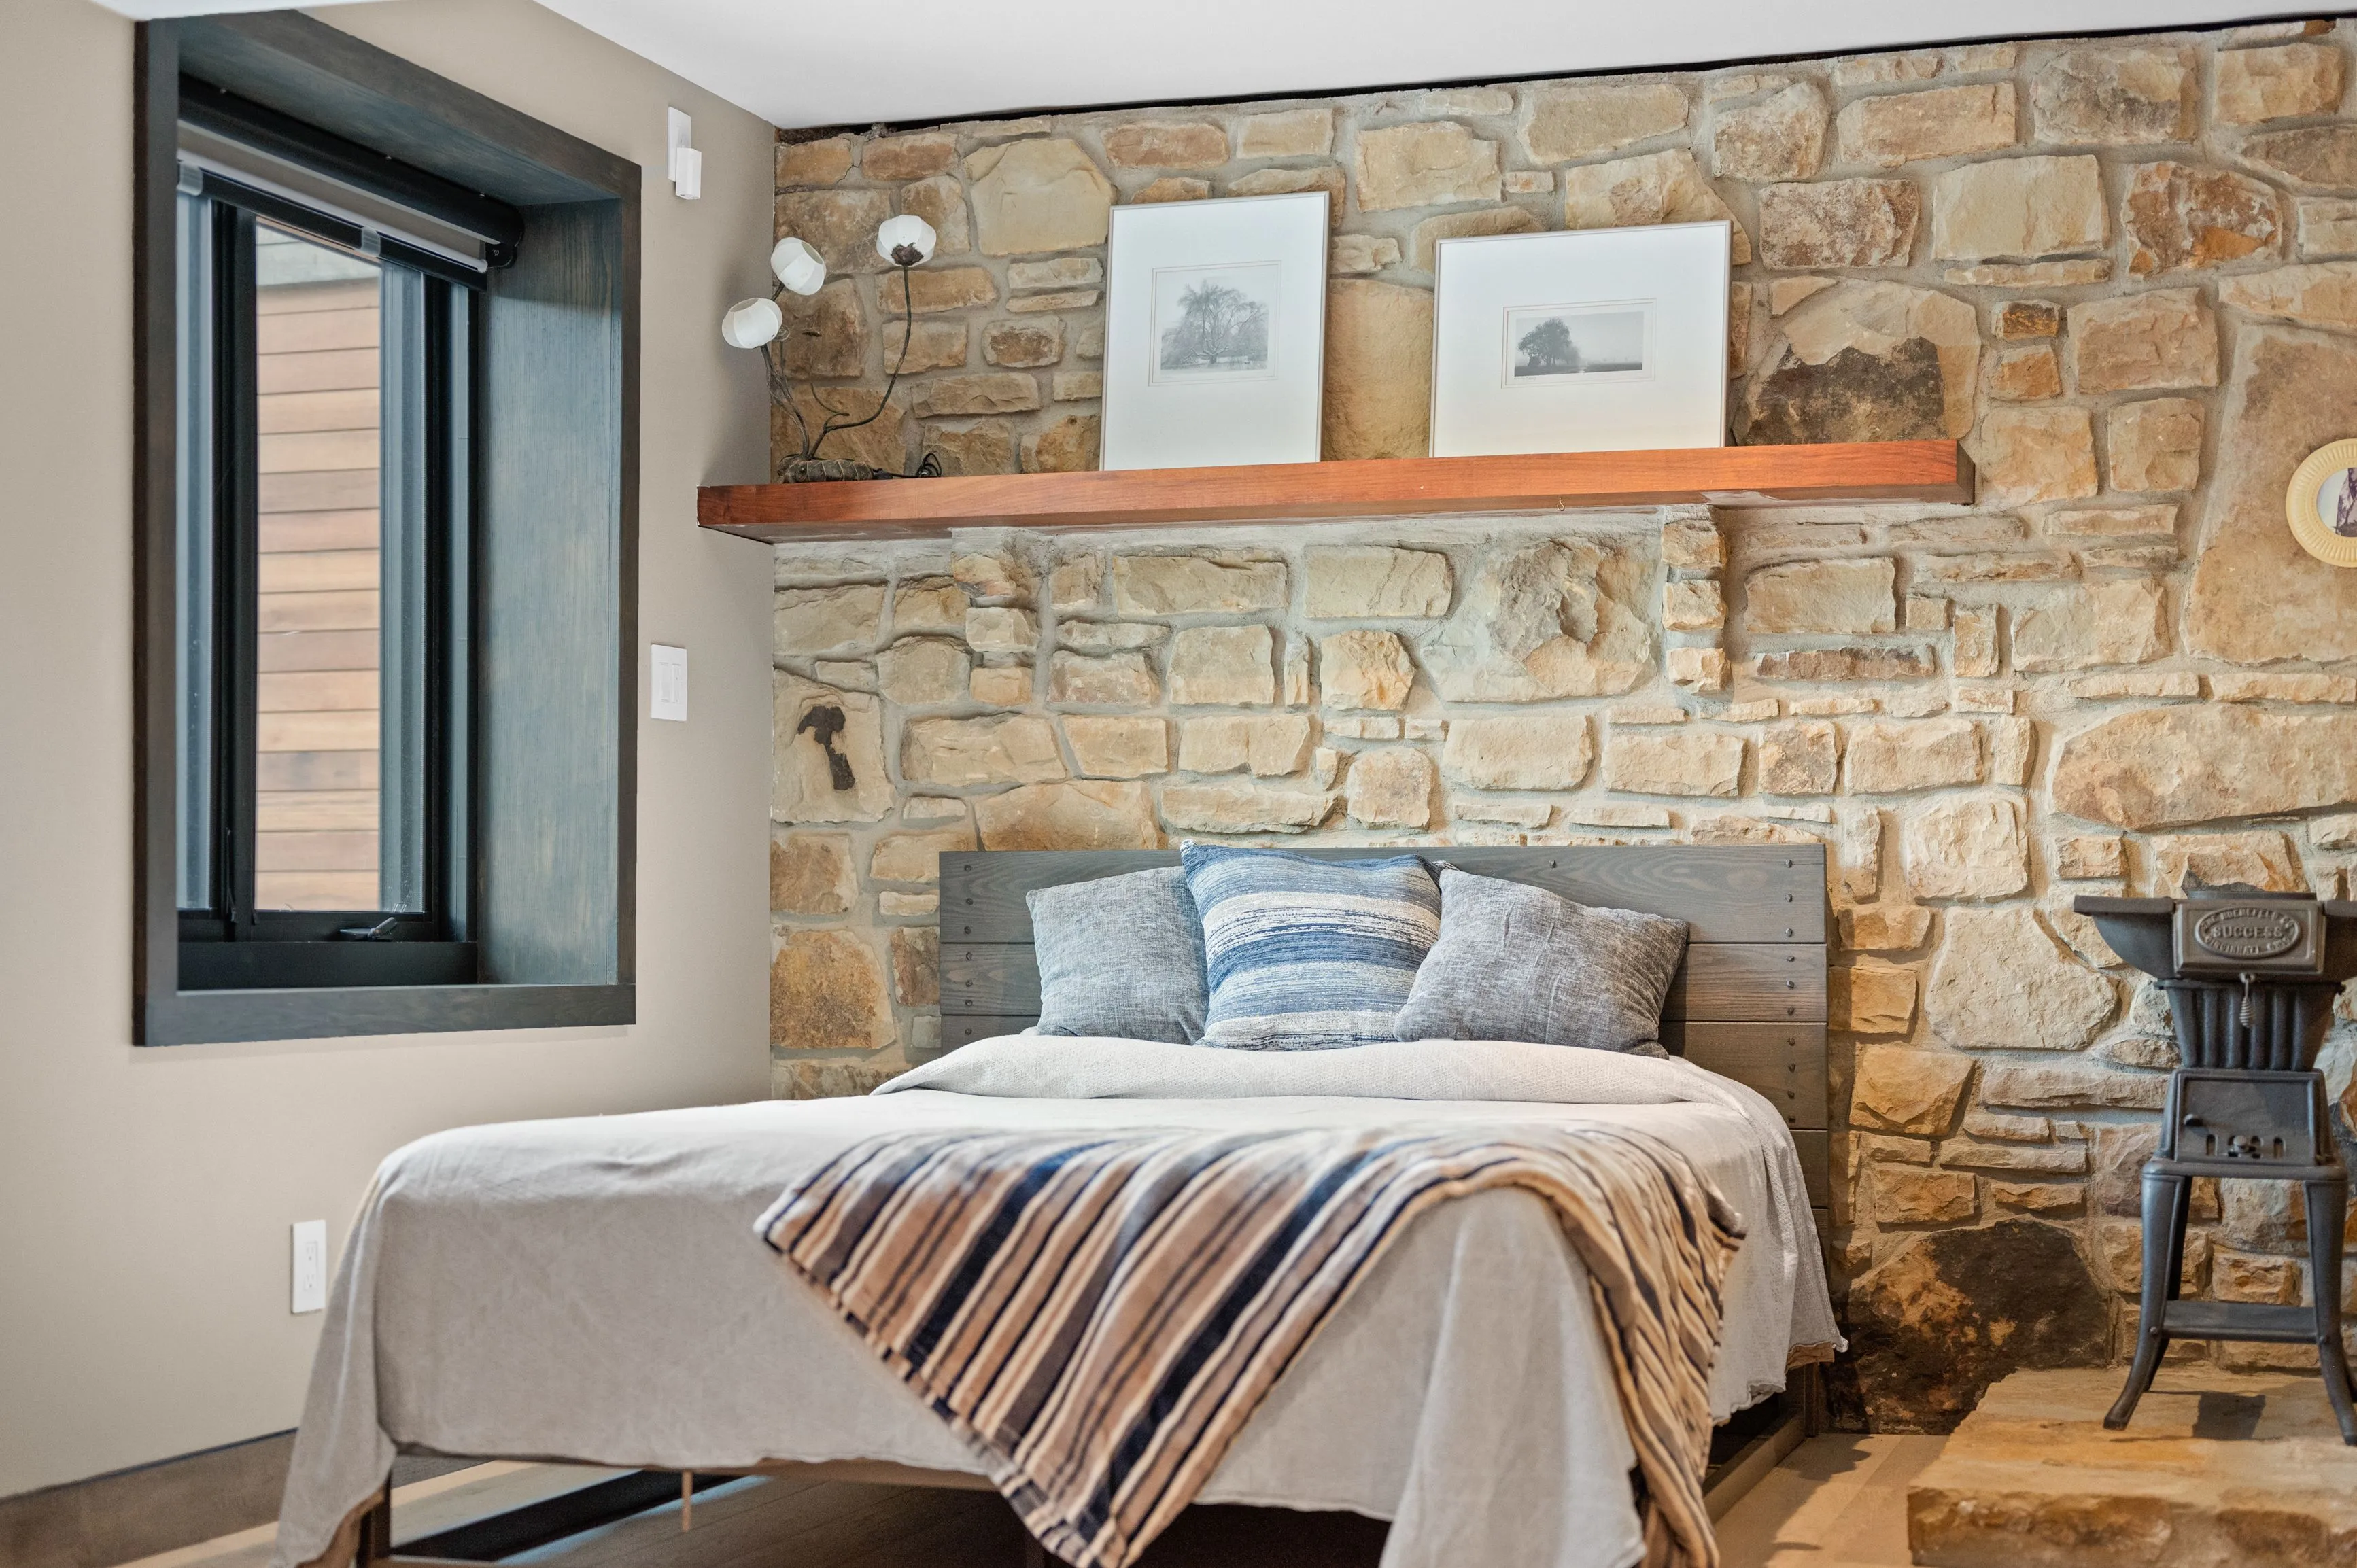 Cozy bedroom interior with stone wall, wooden shelf with framed pictures, bed with pillows and striped throw, and vintage stove on the side.